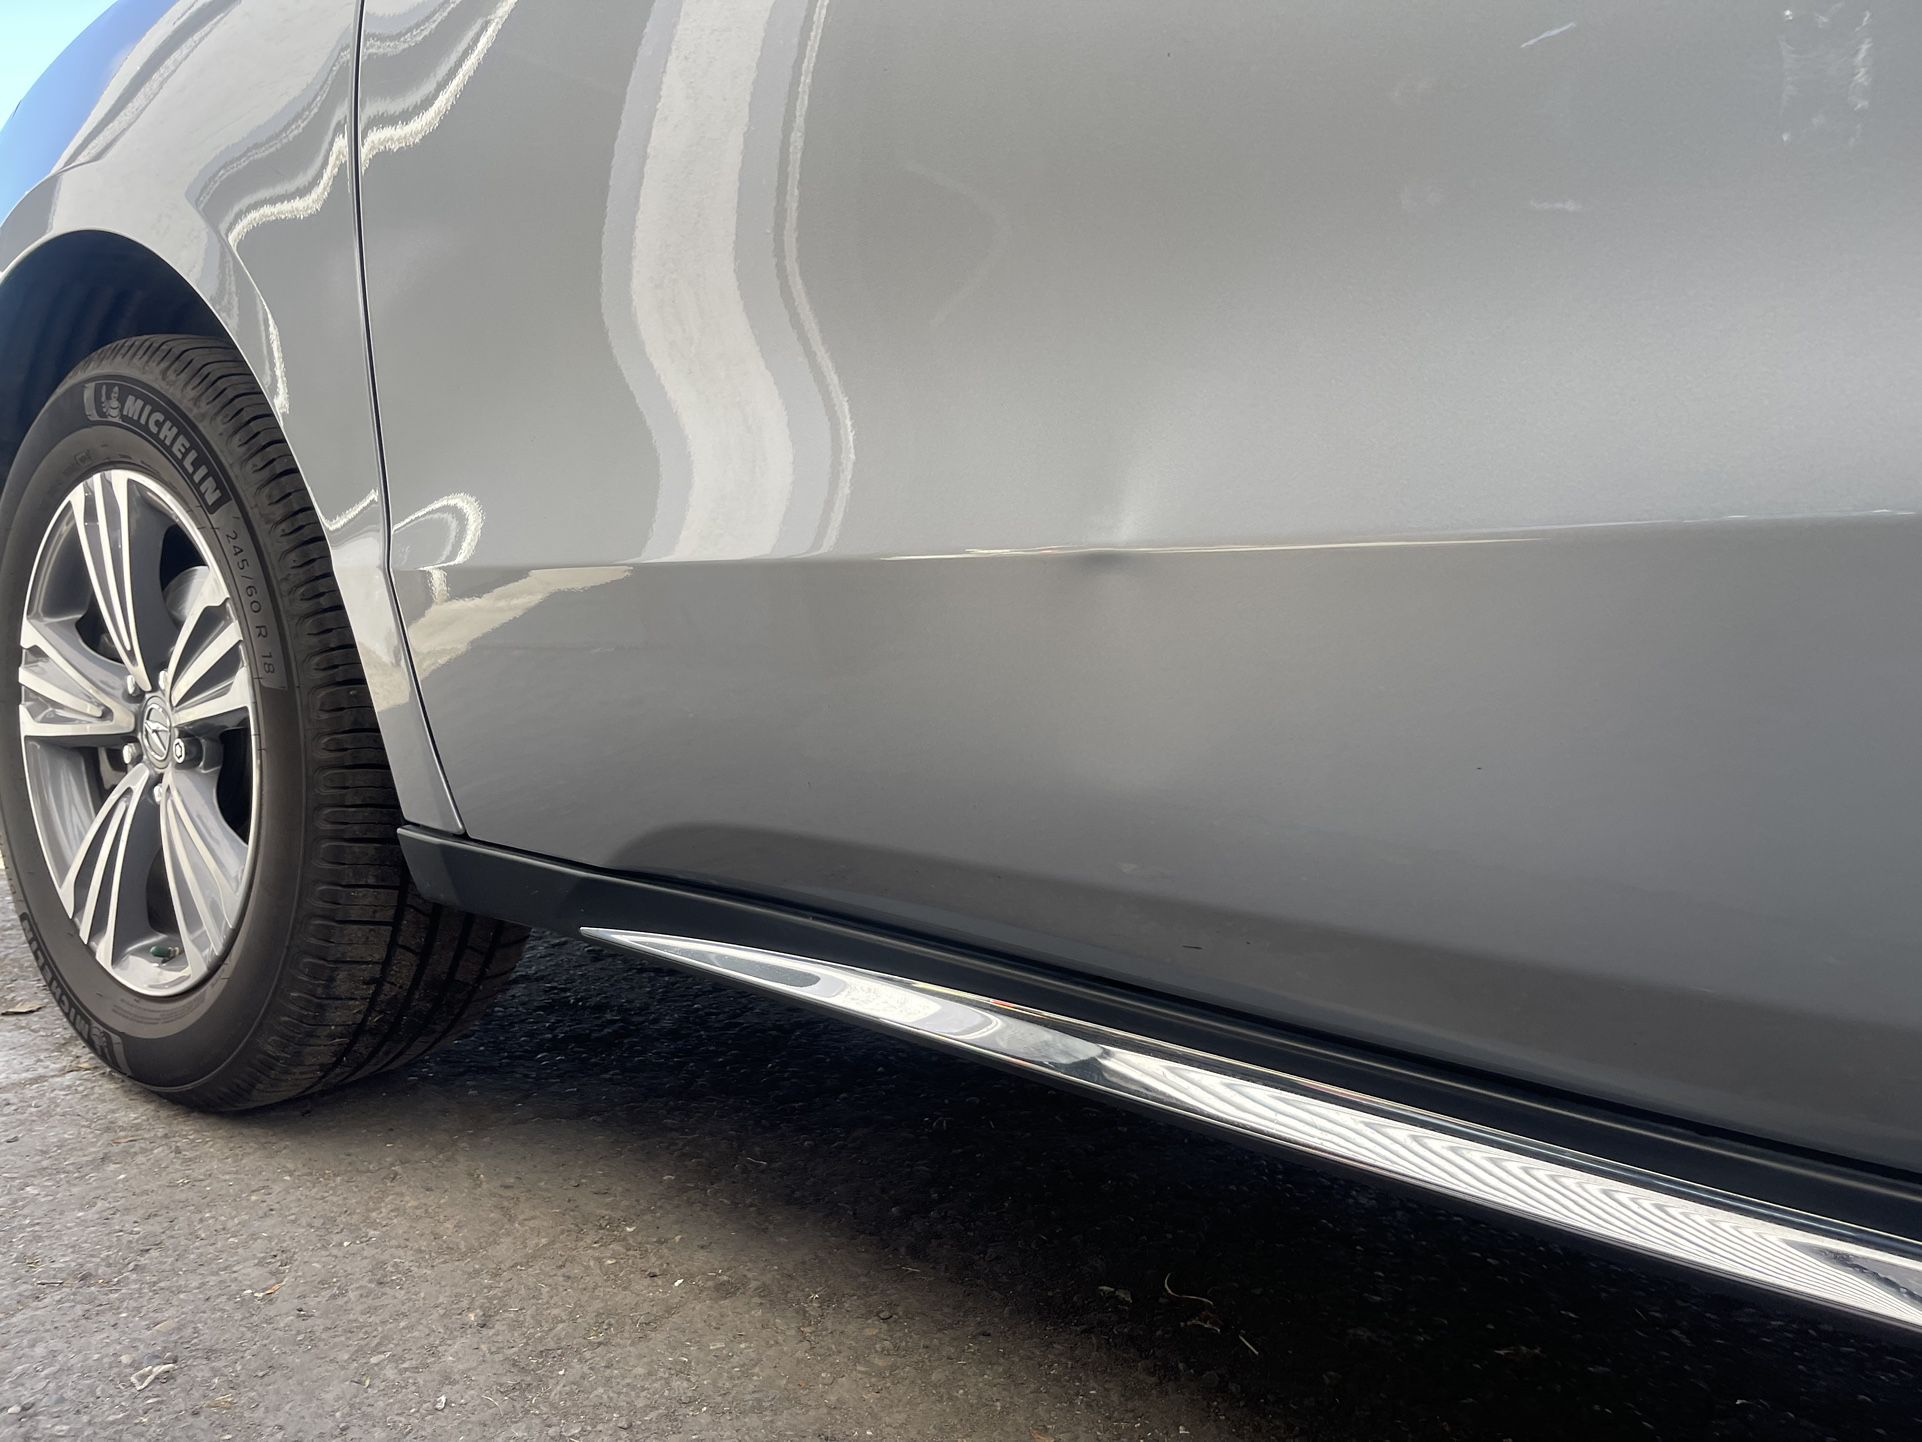 Got Dings And Dents? We Specialize On Dent Repair 